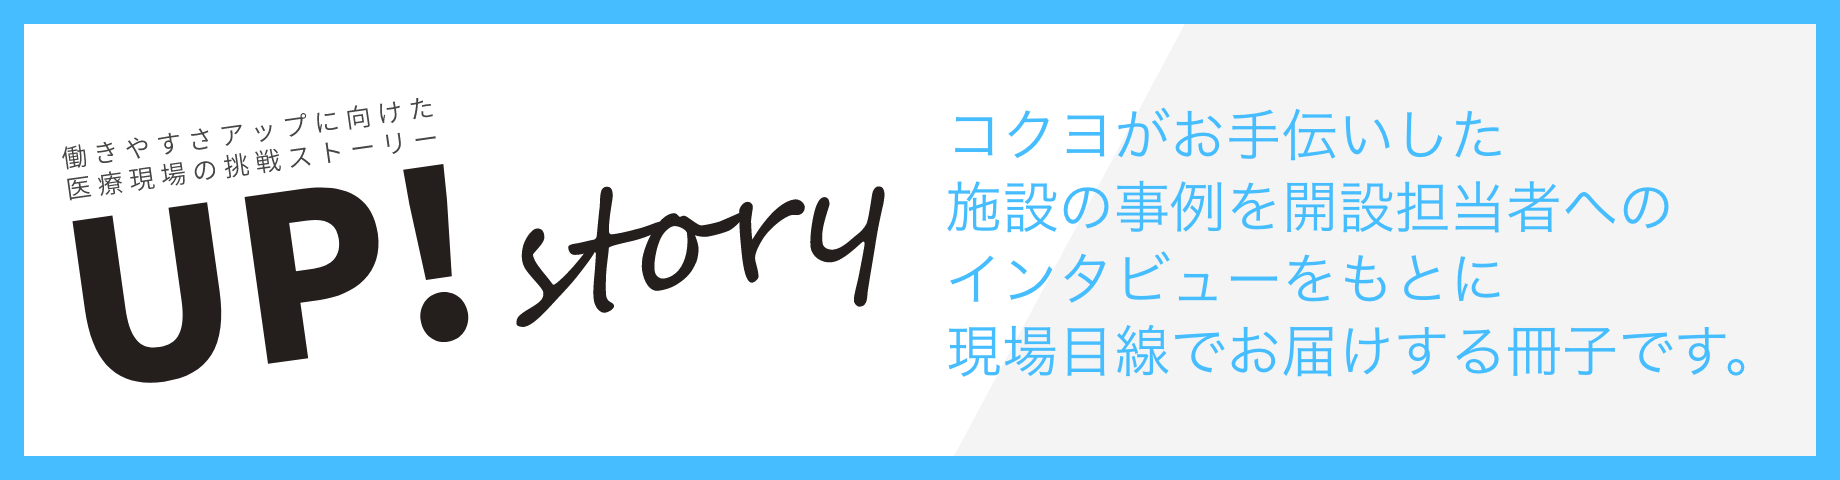 up! story